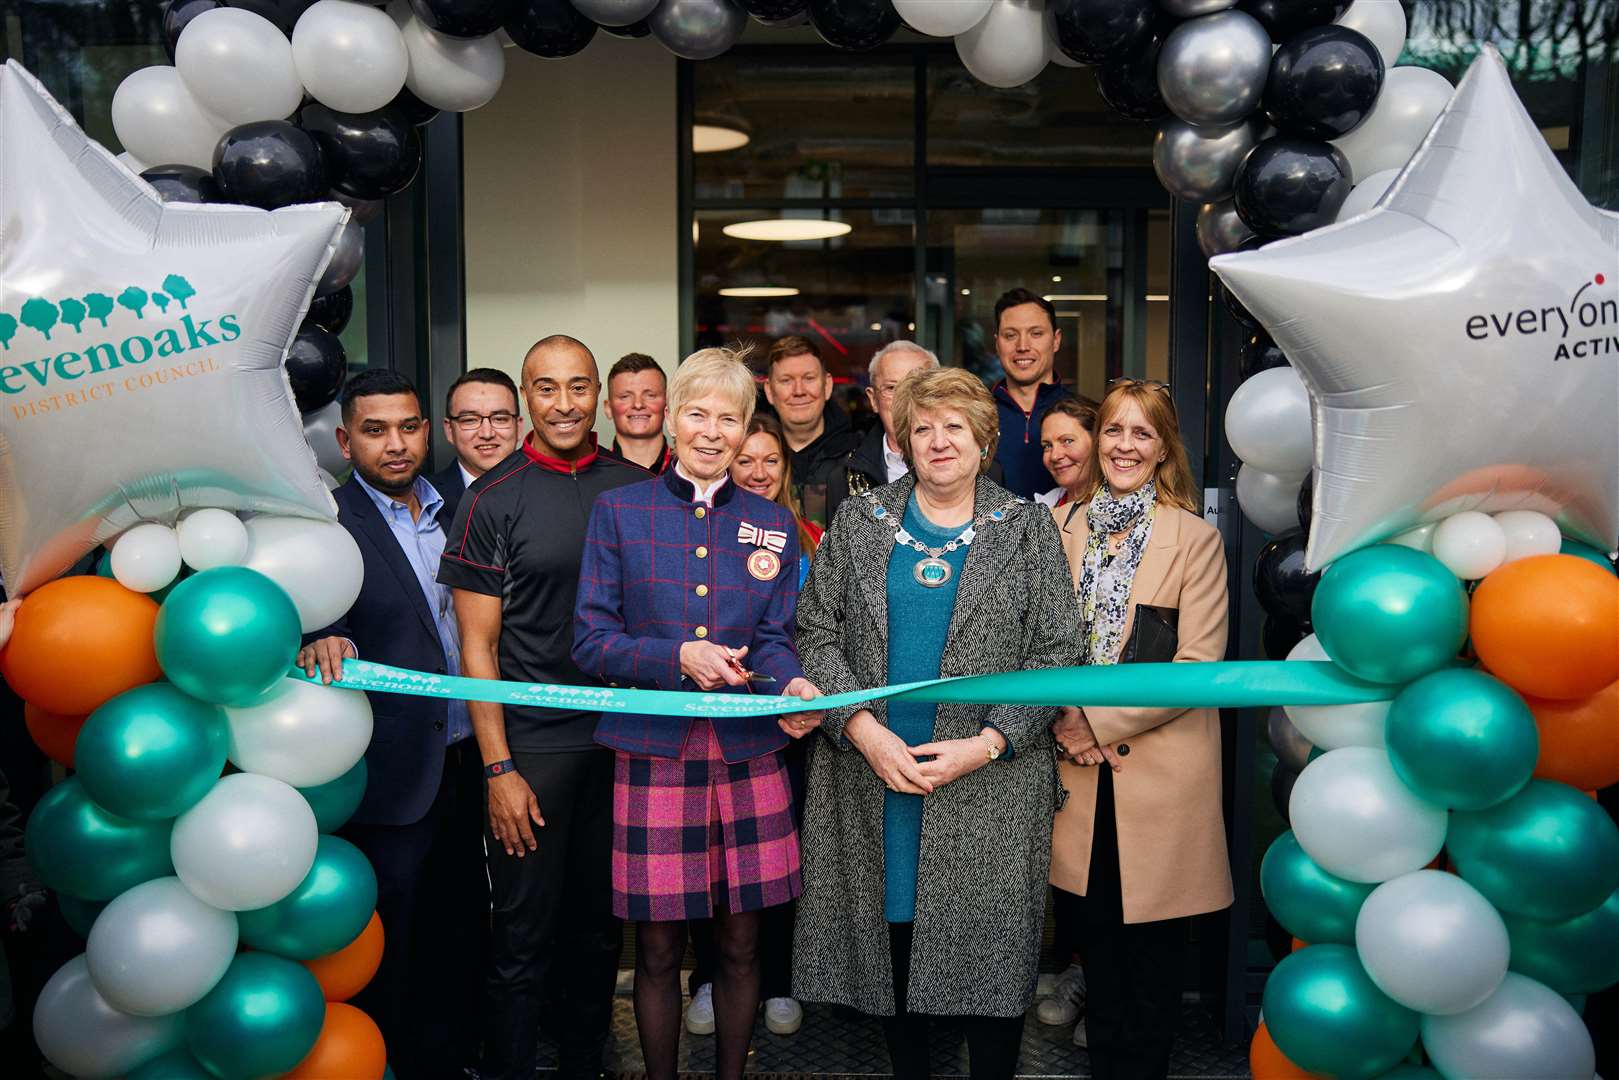 Sporting stars were on hand to launch the new-look £20 million White Oak Leisure Centre in Swanley